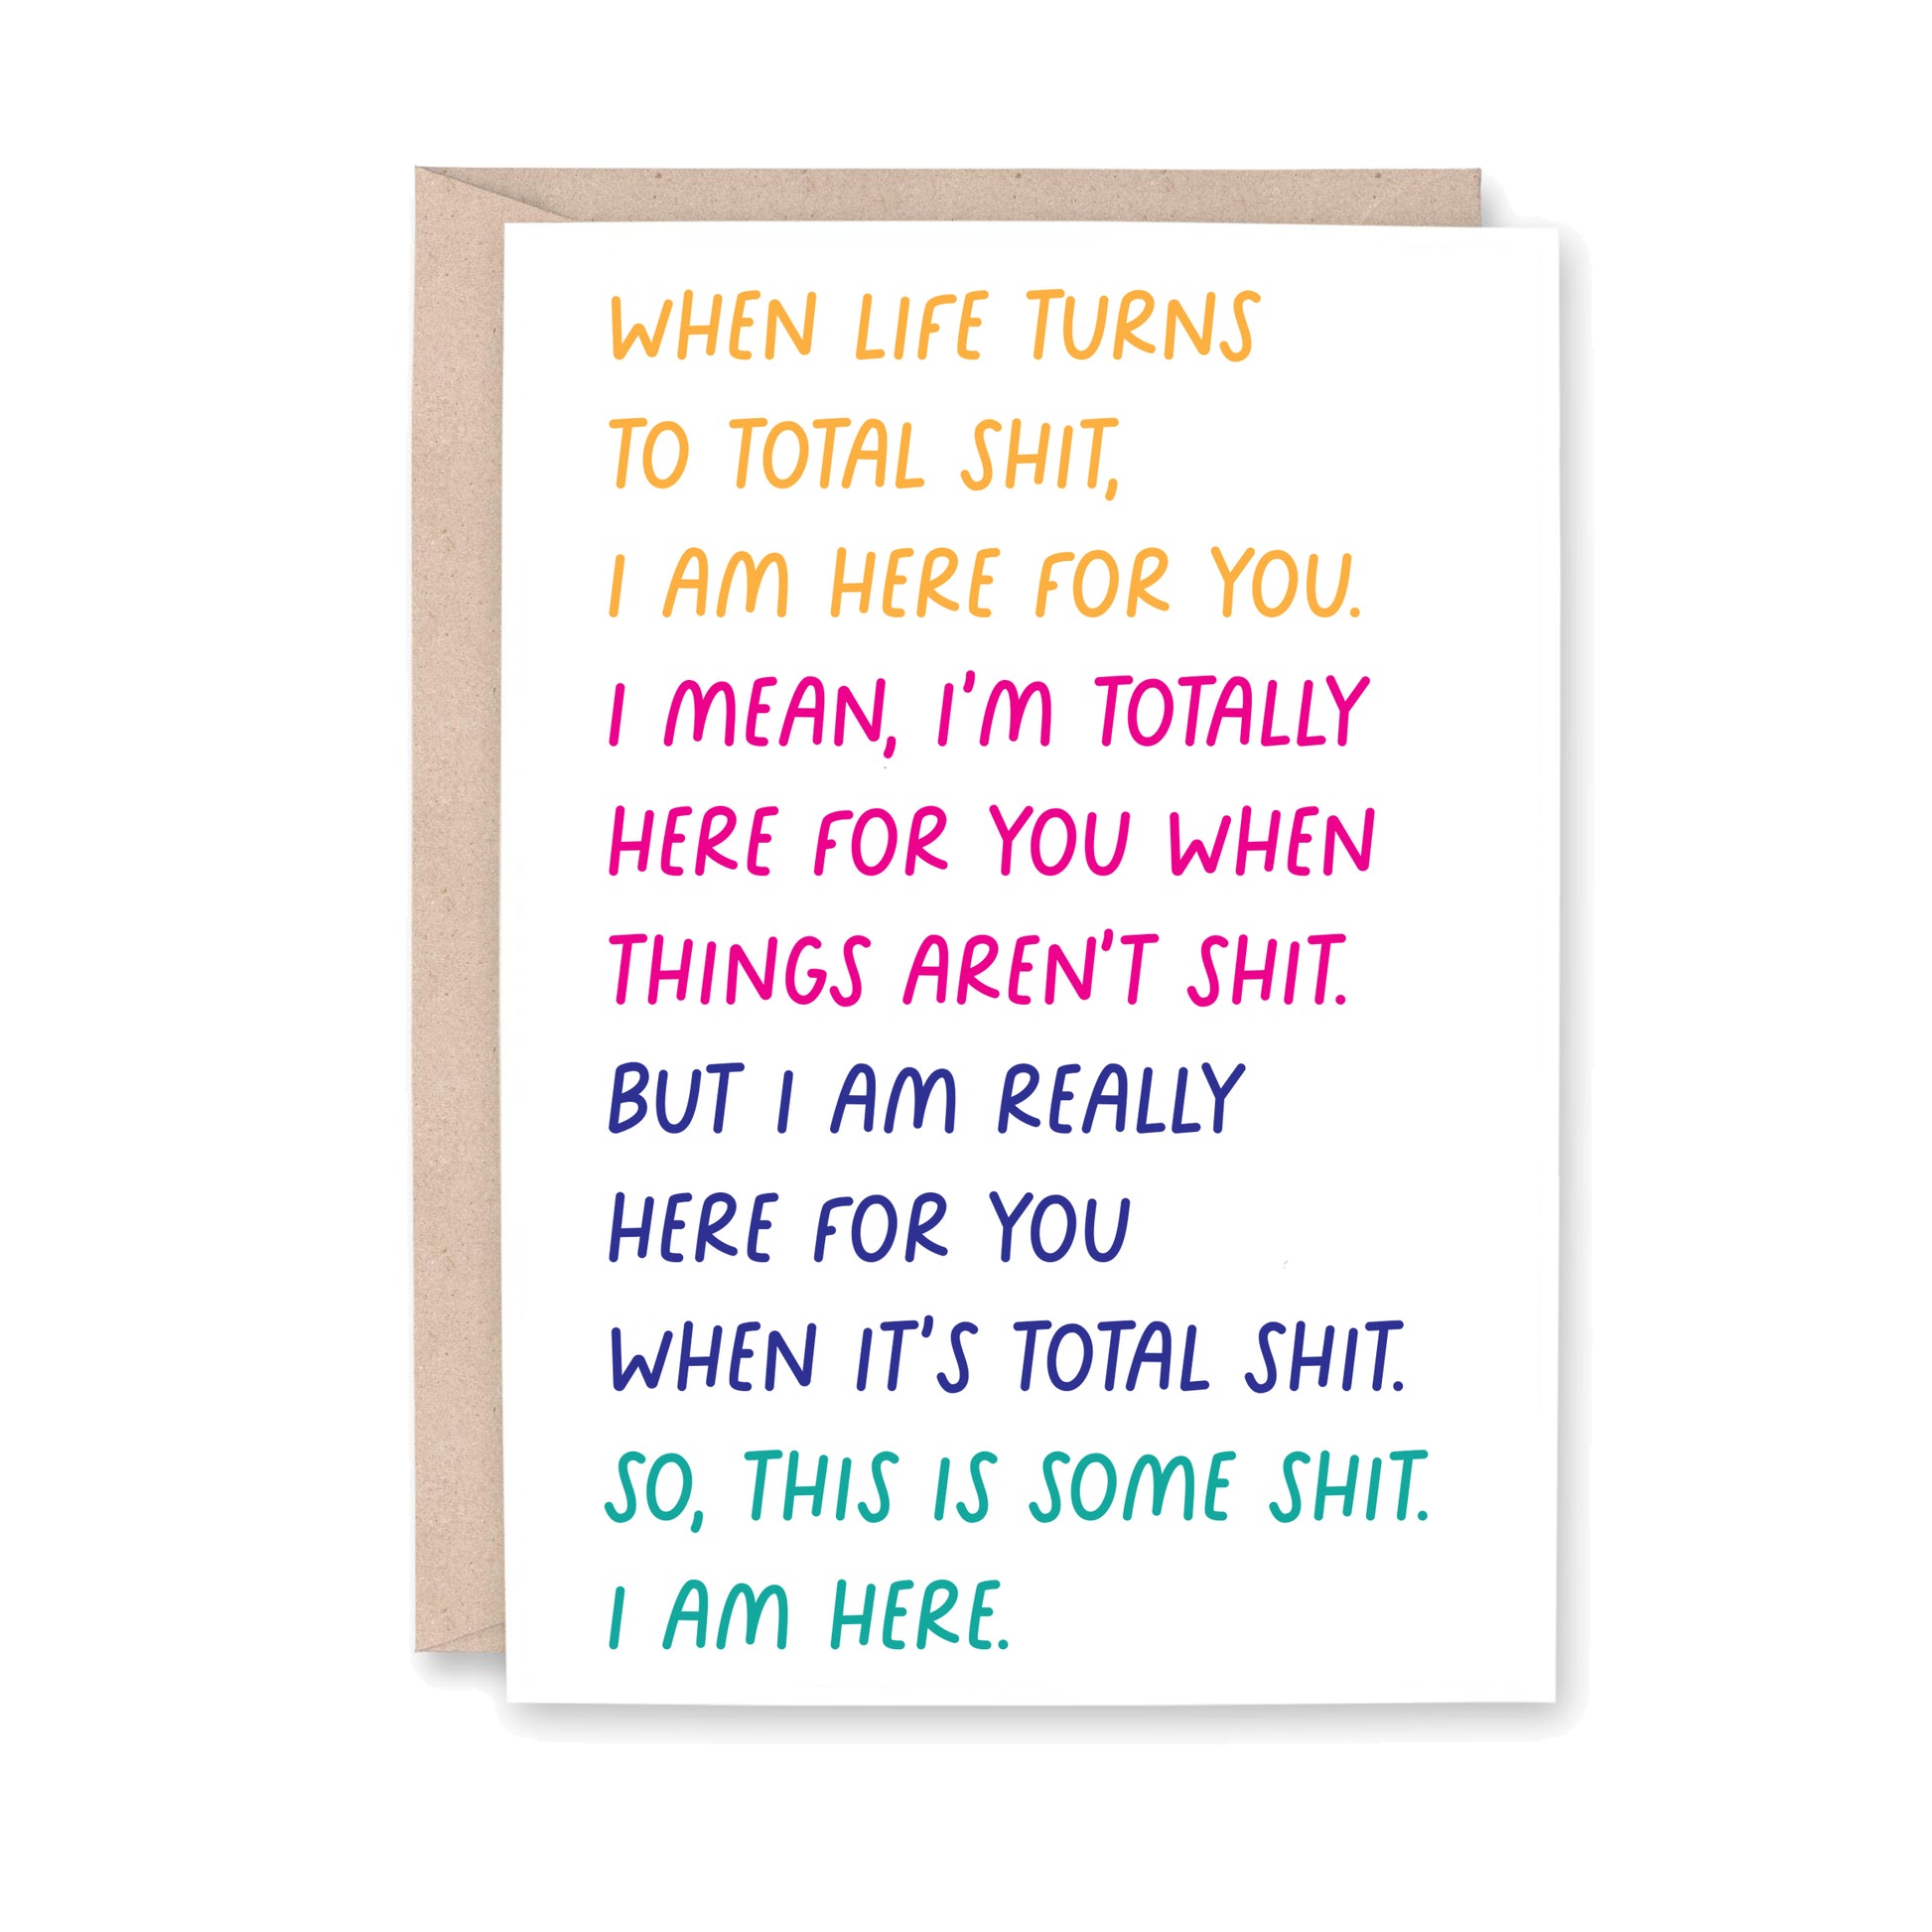 Greeting card that says "When life turns to total shit, I am here for you. I mean, I'm totally here for you when things aren't shit. But I am really here for you when it's total shit. So, this is some shit. I am here."